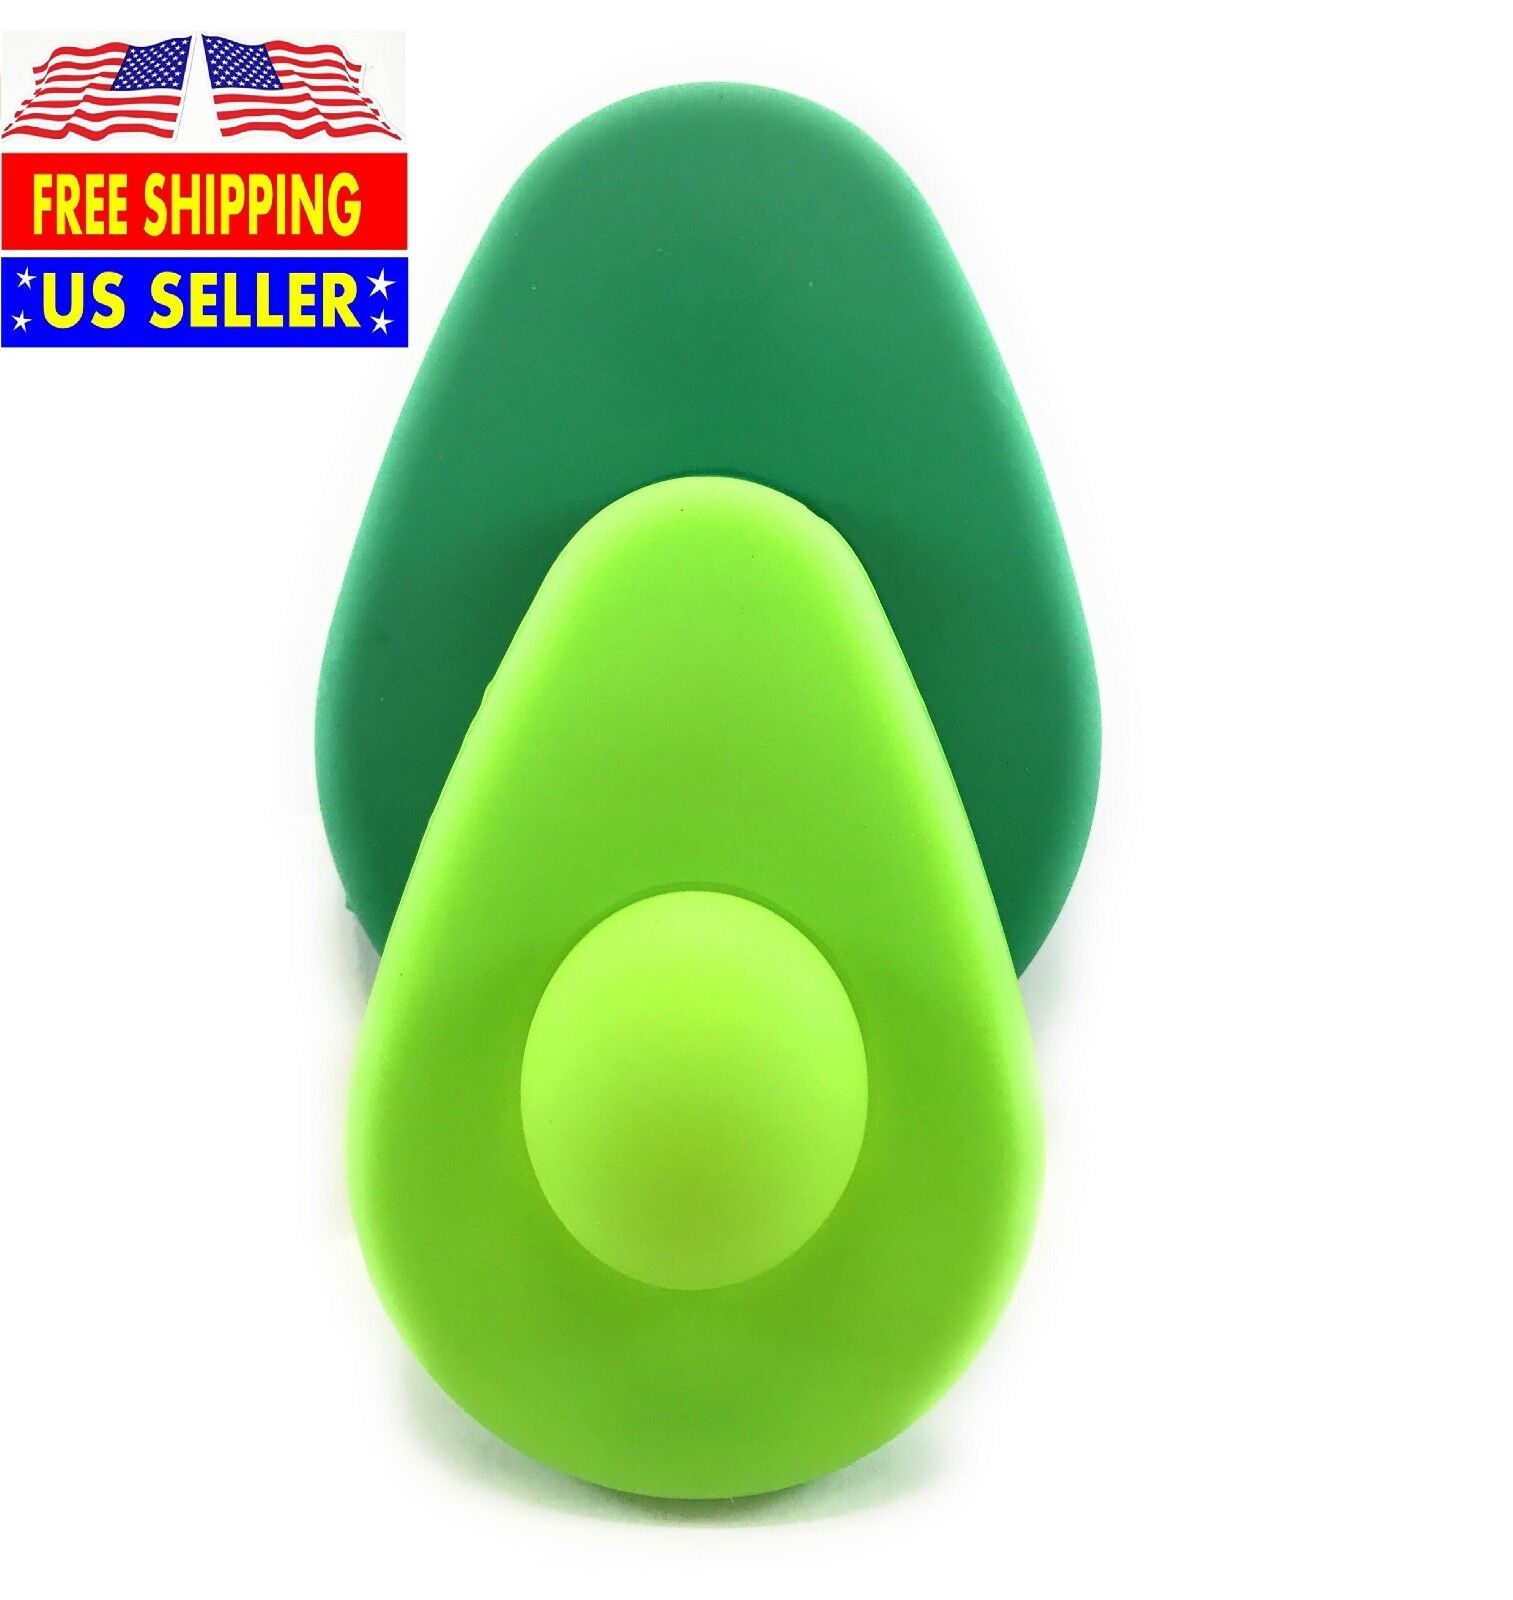 New Set Of 2 Avocado Silicone Saver Free First Class Shipping Of Fresh Keeper